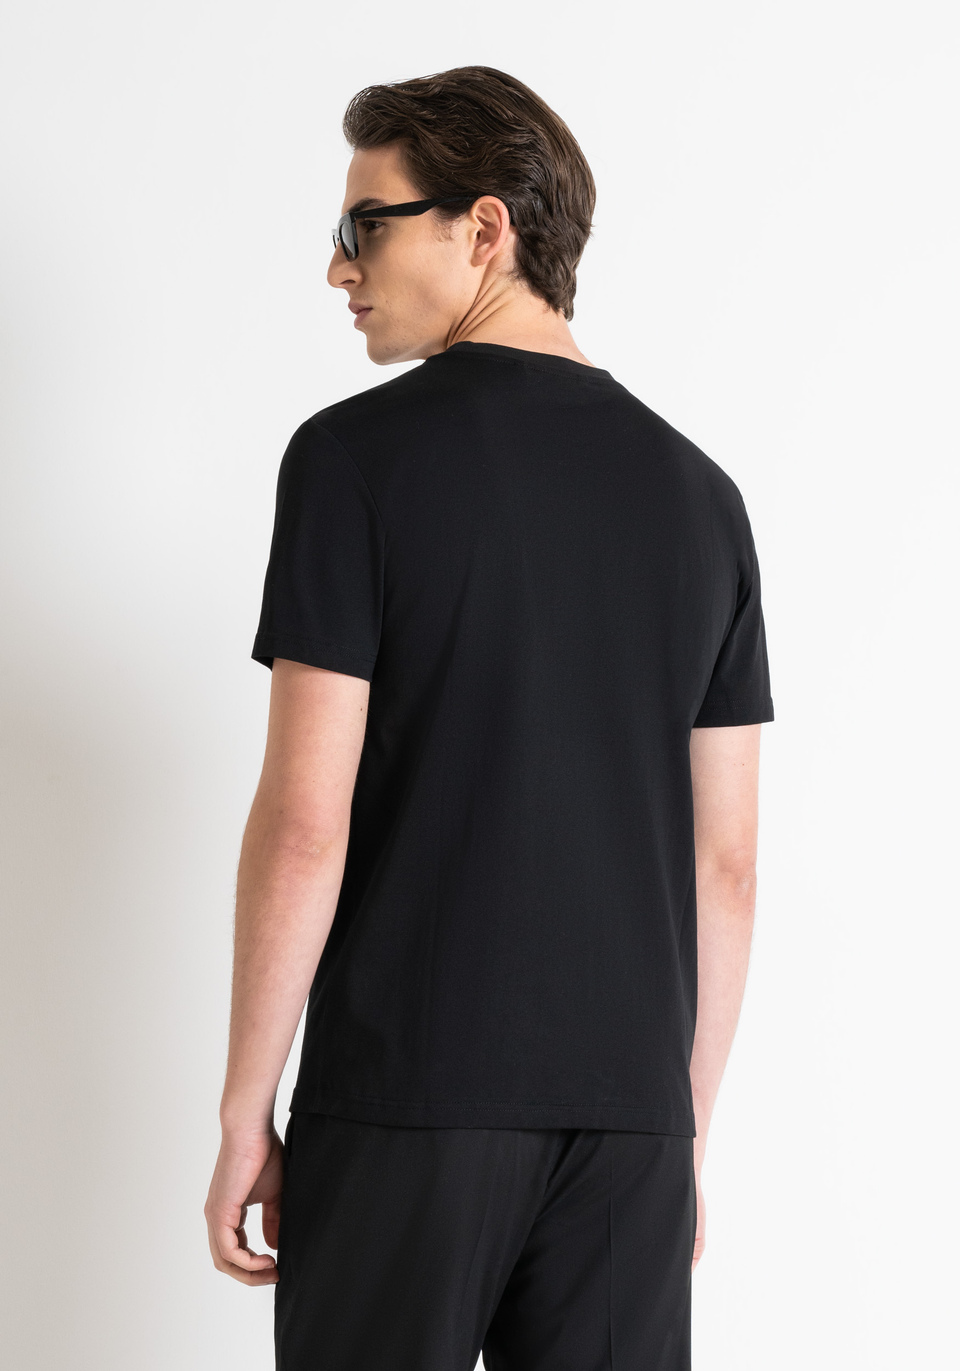 SLIM FIT T-SHIRT IN COTTON JERSEY WITH LOGO PRINT - Antony Morato Online Shop